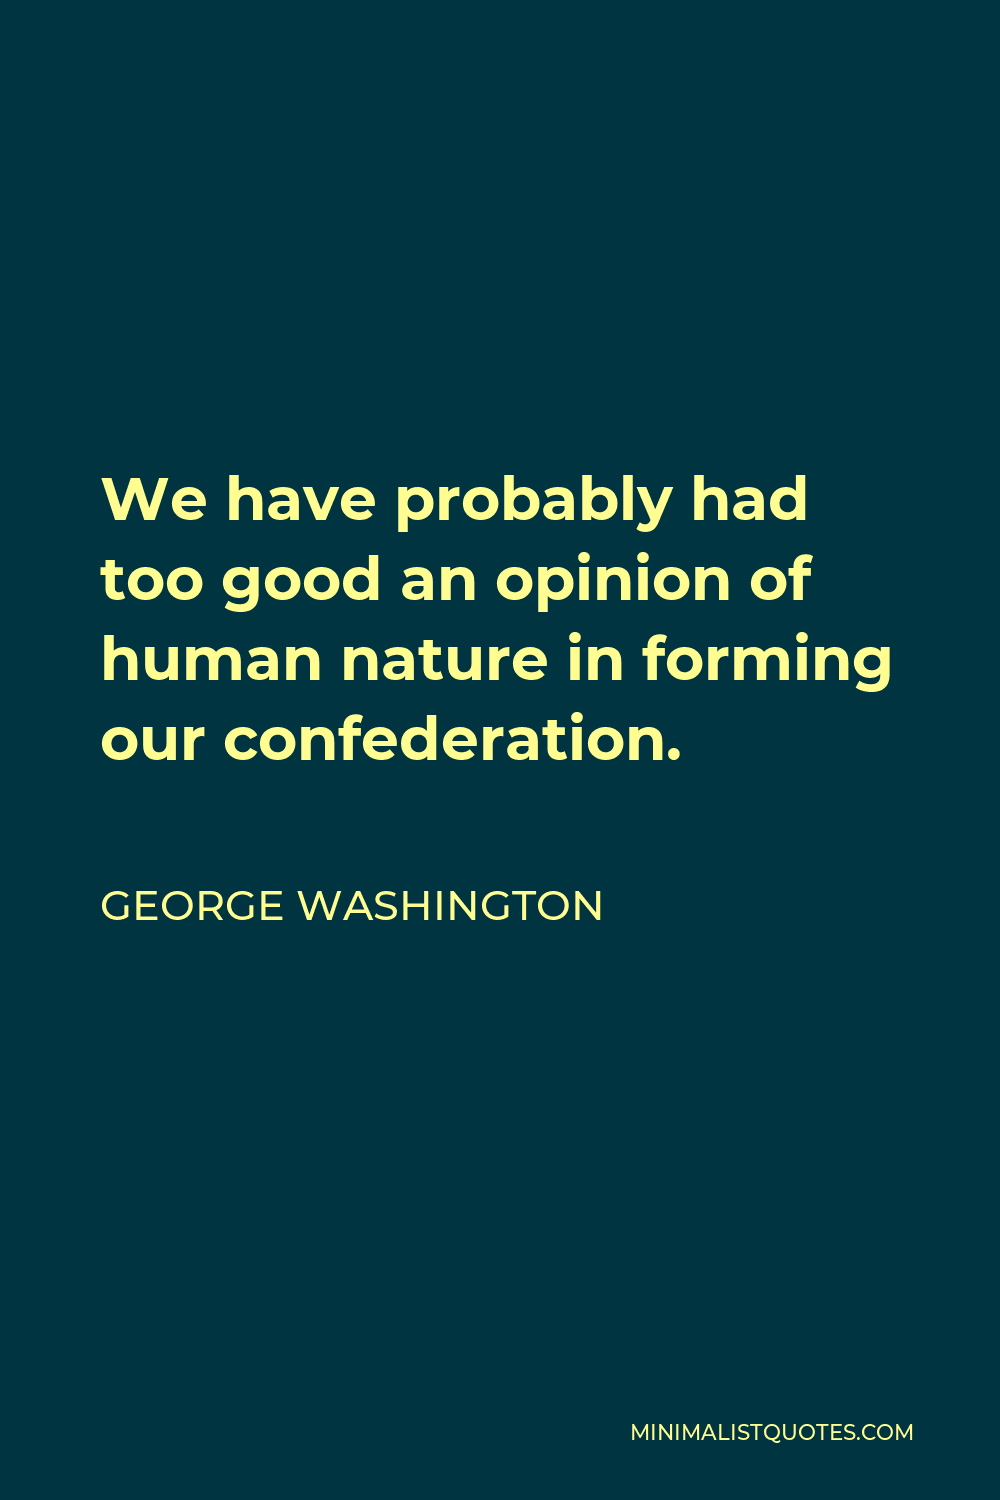 George Washington Quote - We have probably had too good an opinion of human nature in forming our confederation.